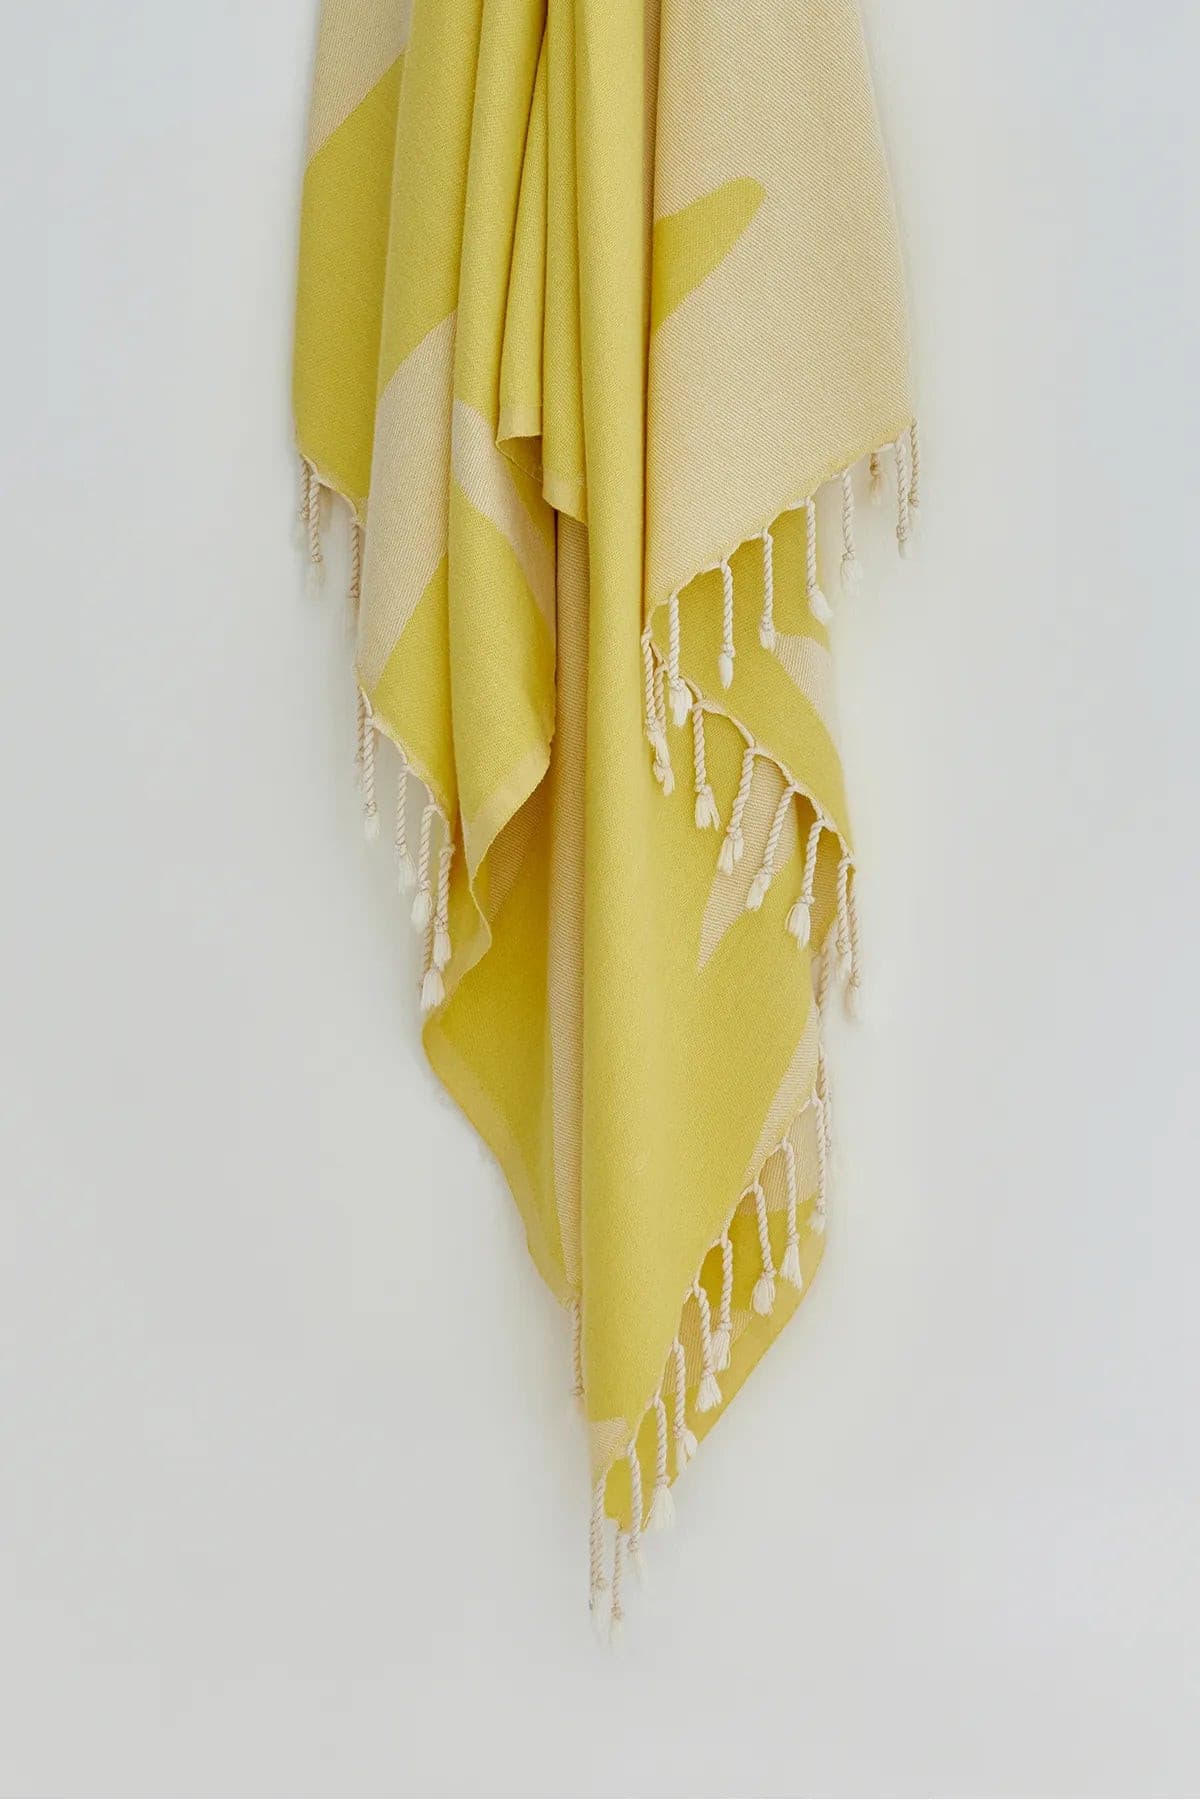 Beach/Bath,living place,Mellow Yellow,Turkish towel,detailed,summer,line patterned,double-faces,purified sand,light,compact, easy pack,fun, recycled, double color,diamond,eastern flare,breeze,tropical forest